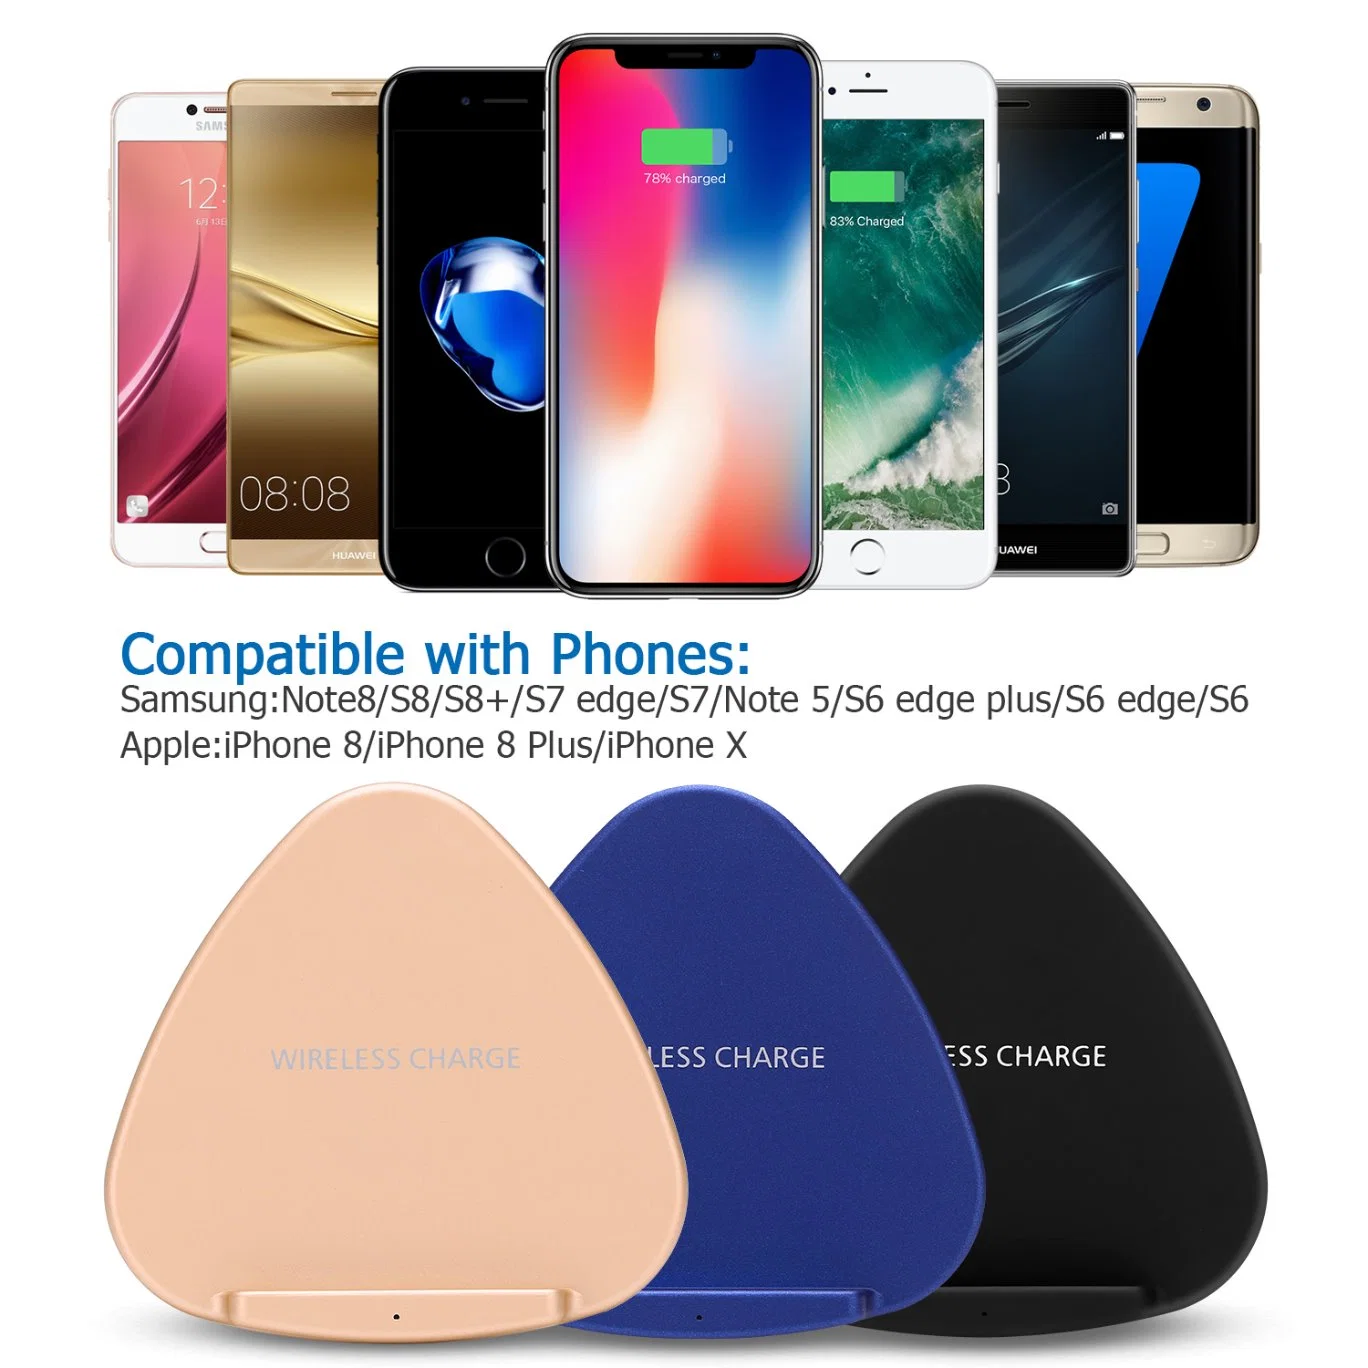 The Classical Wireless Charger for The Mobile Phone and iPad